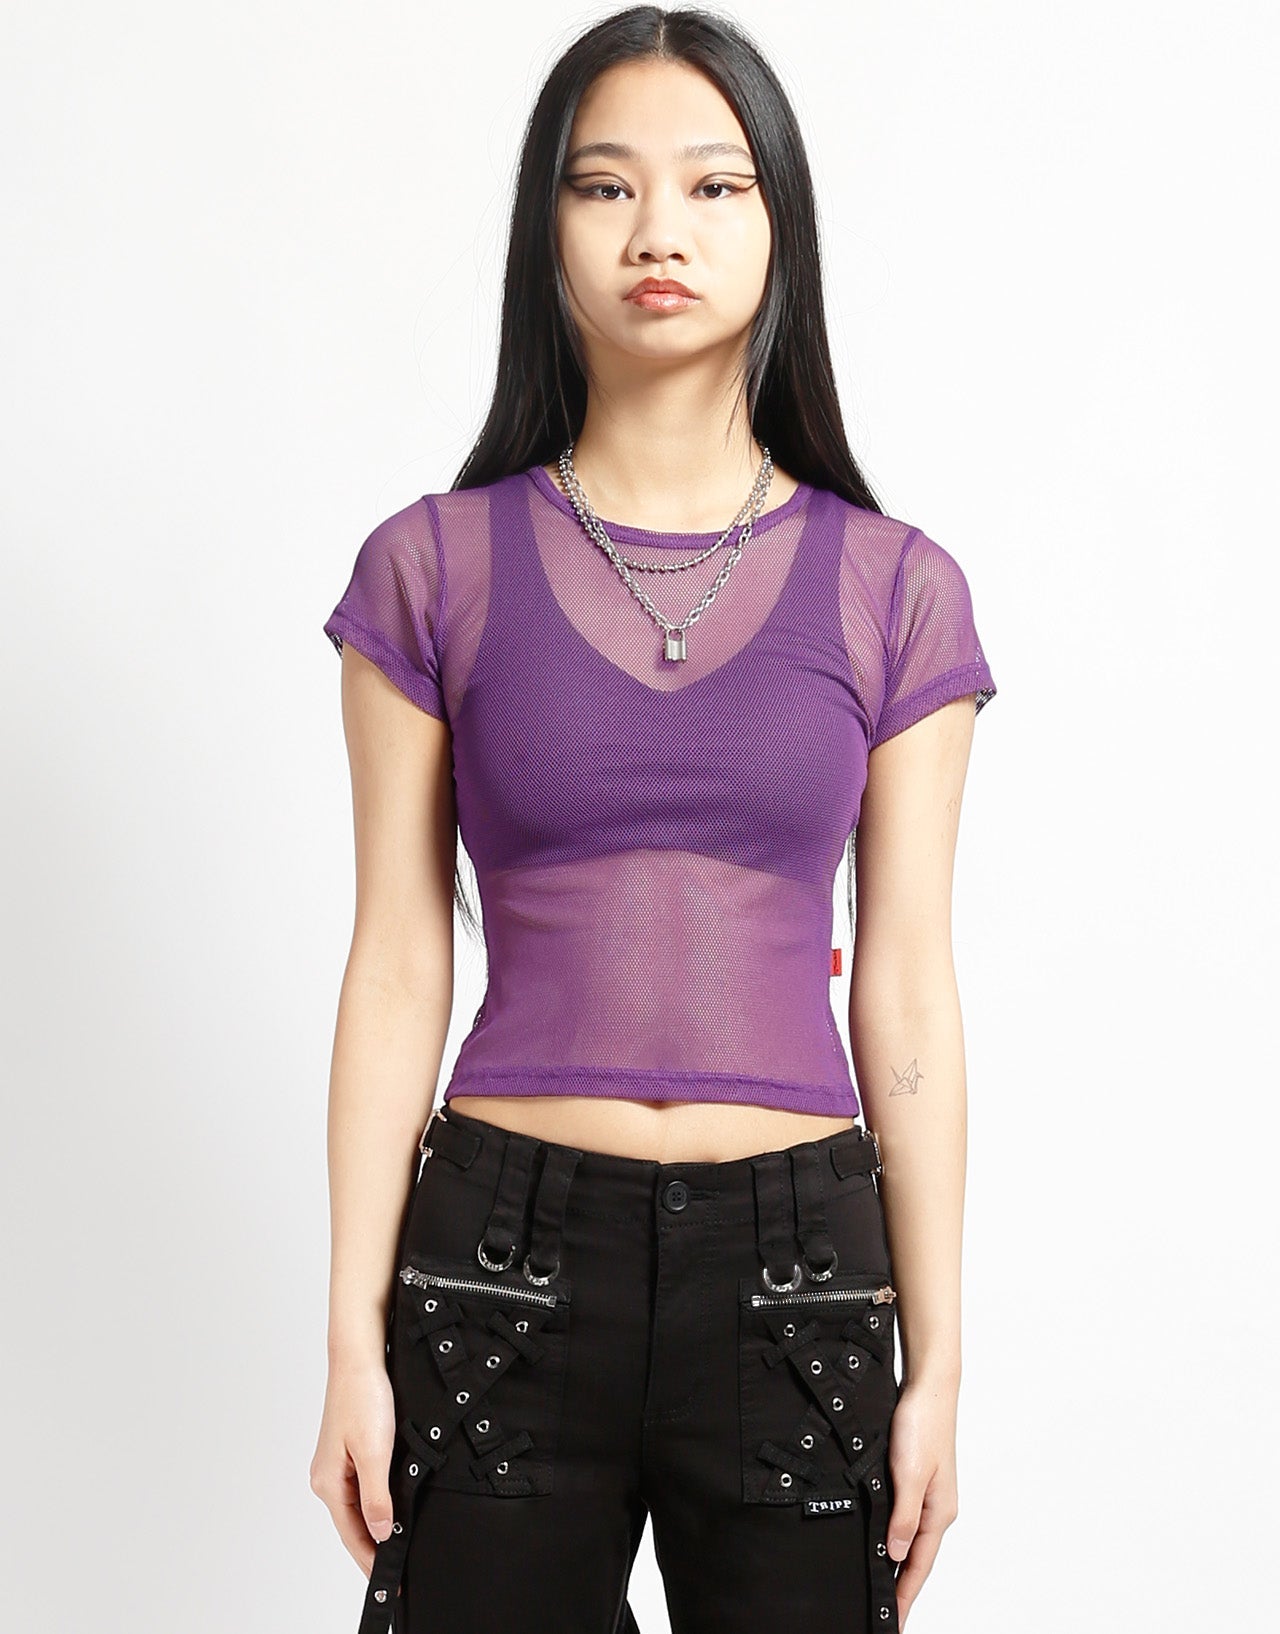 A model wearing the purple Baby Short Sleeve Fishnet Tee Shirt with black pants, front view.